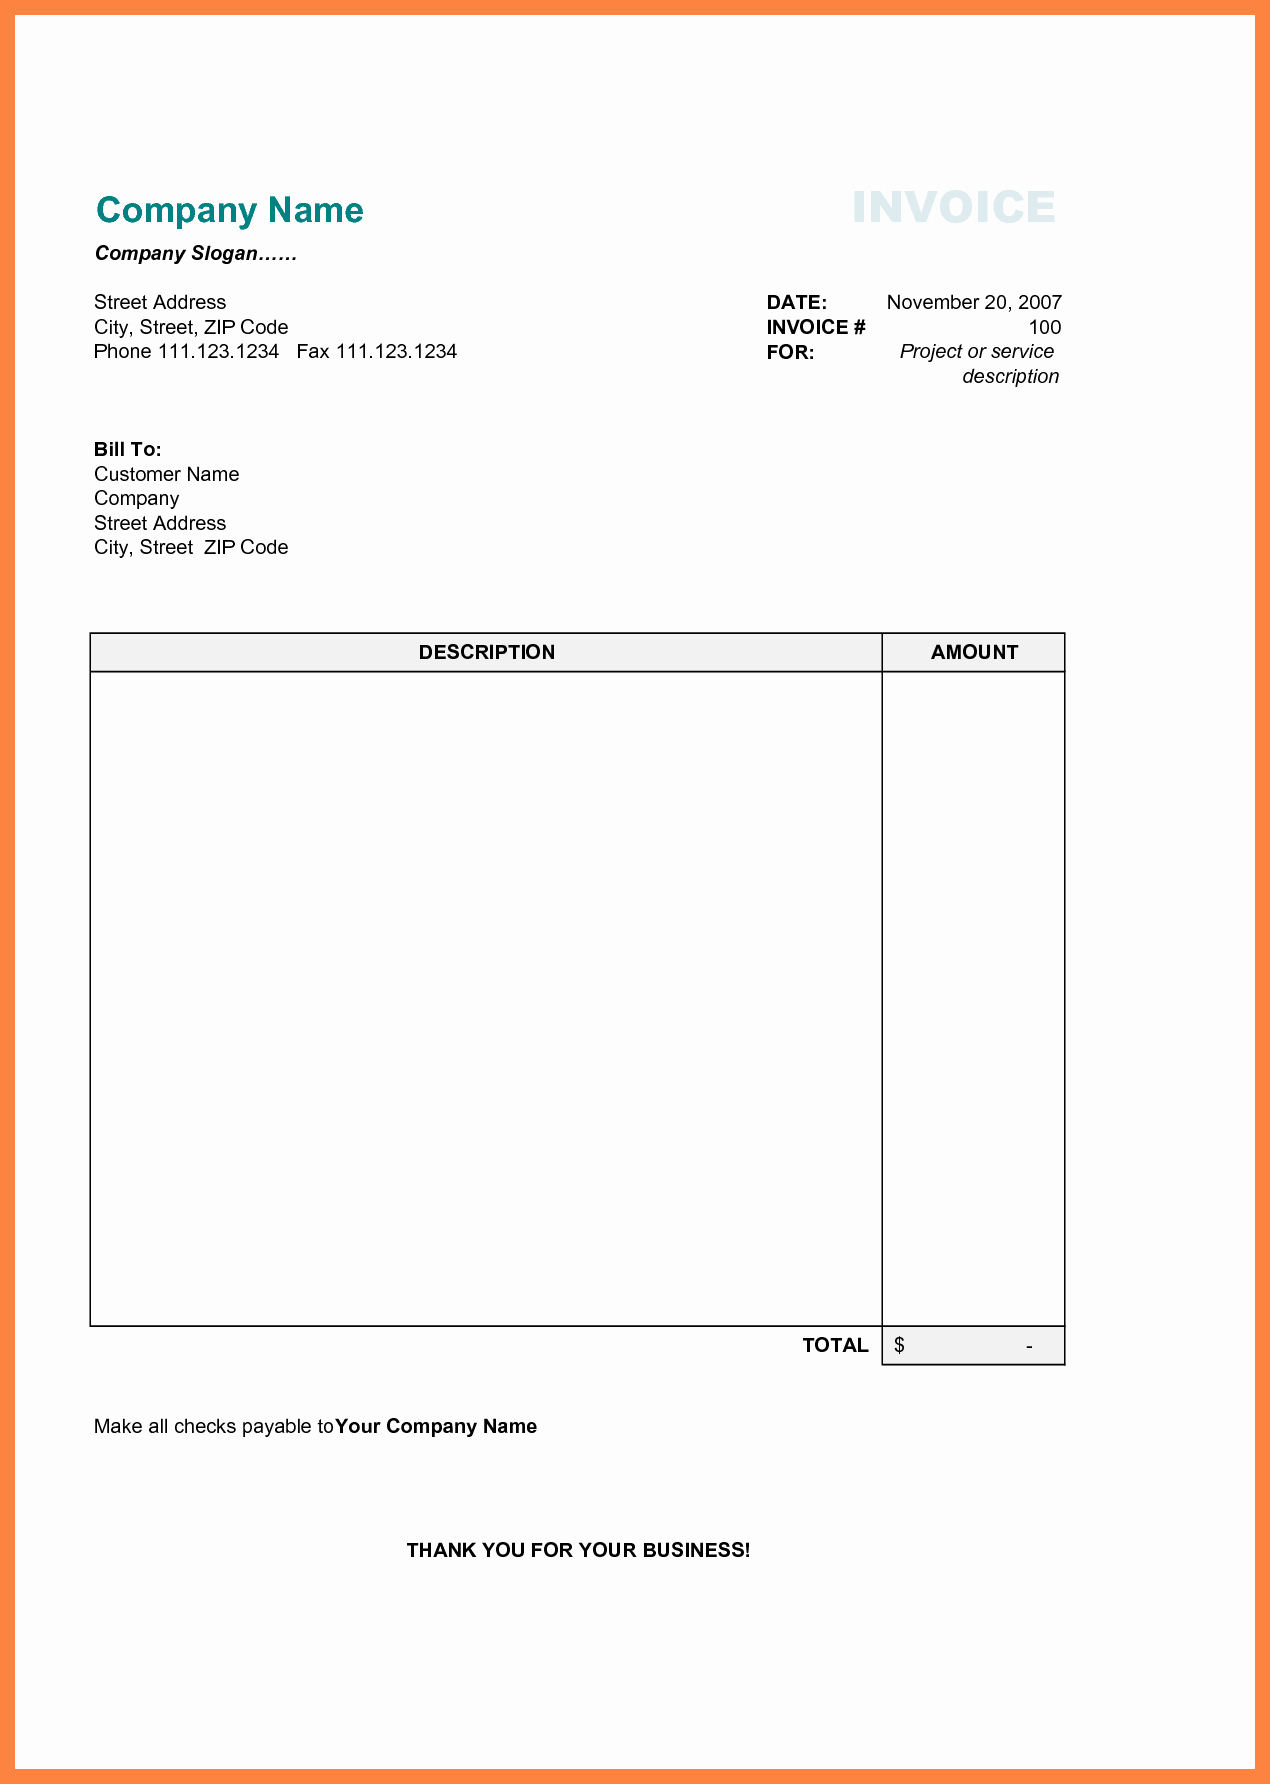 simple invoice template excel best of free printable business invoice template invoice format of simple invoice template